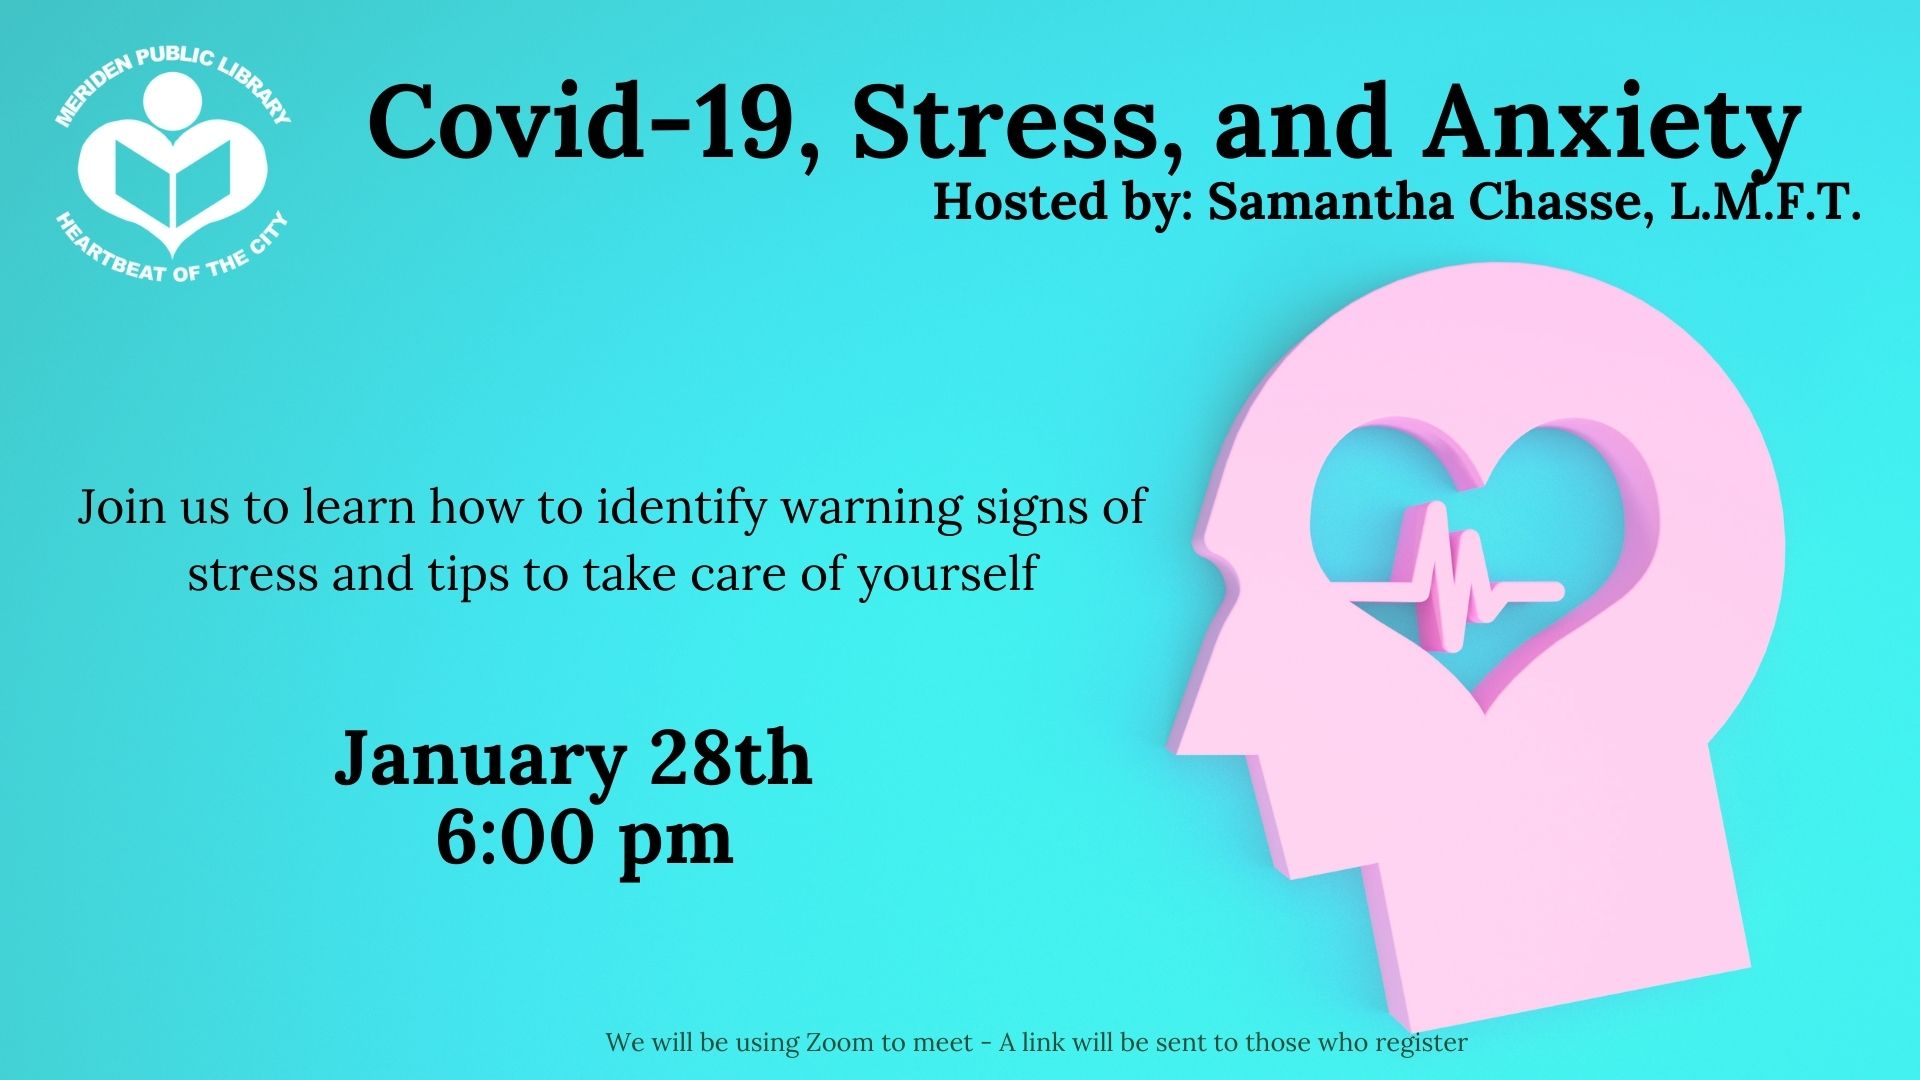 Coping with Covid-19 Stress and Anxiety